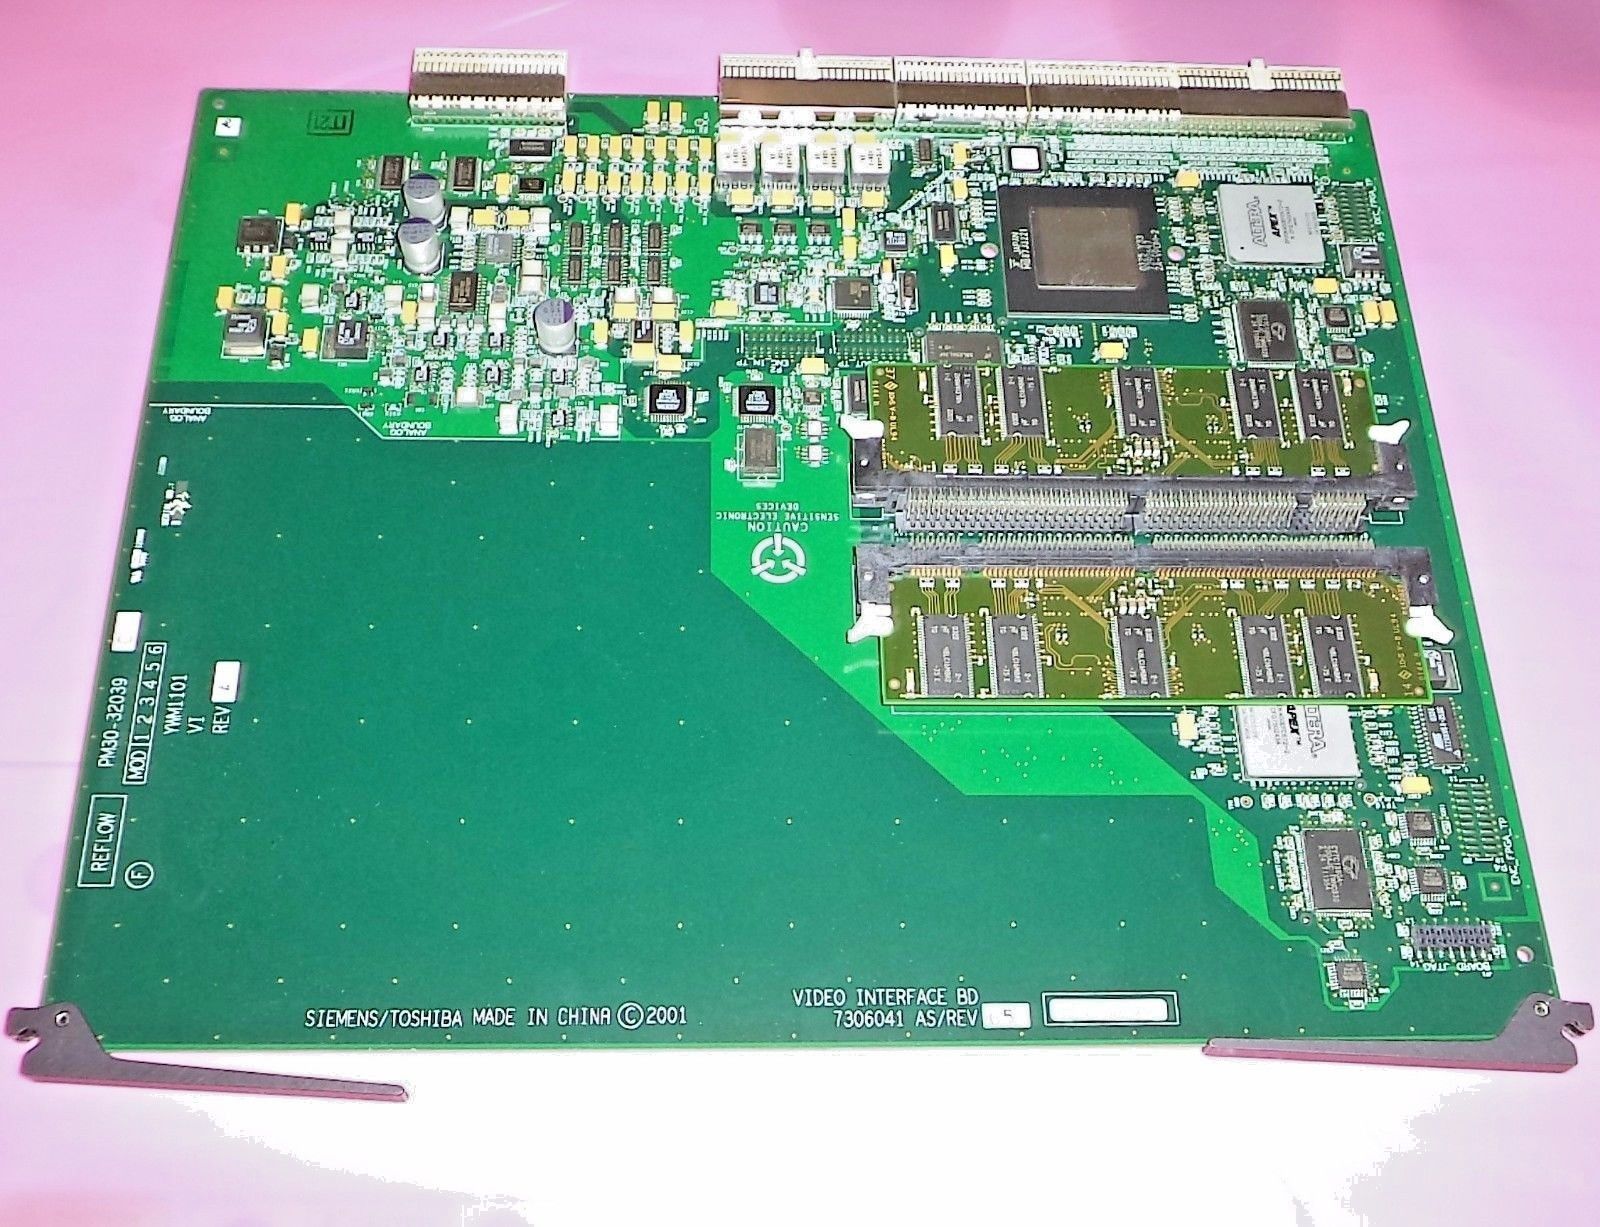 Siemens Antares Ultrasound Video Interface Board (PN: 07306041) DIAGNOSTIC ULTRASOUND MACHINES FOR SALE